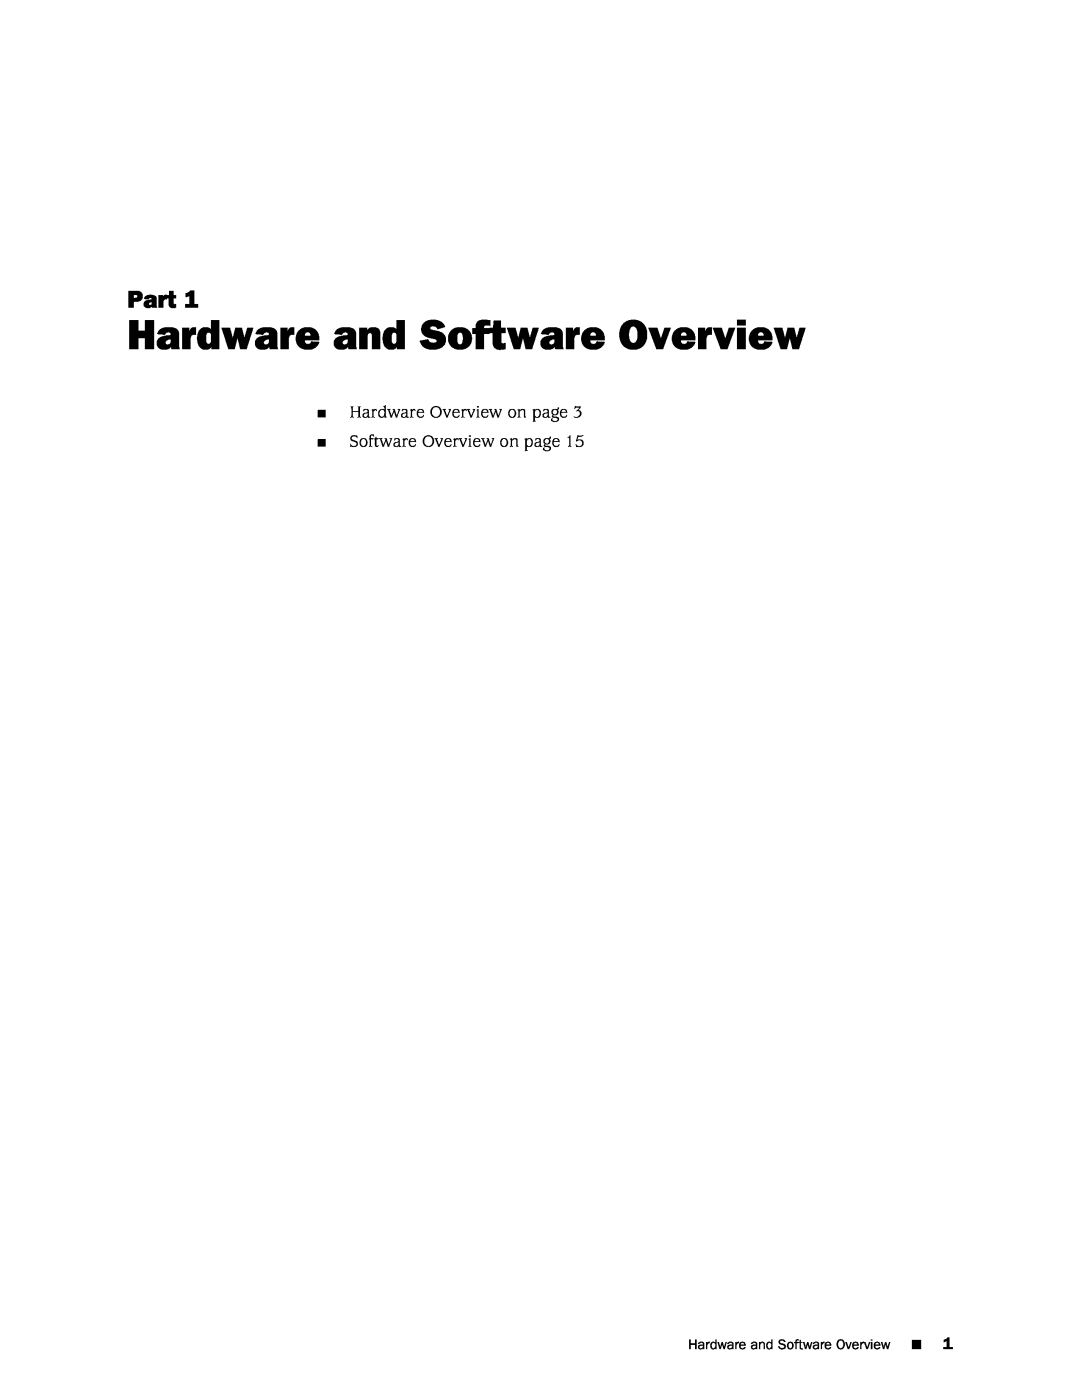 Juniper Networks IDP250 manual Hardware and Software Overview, Part 